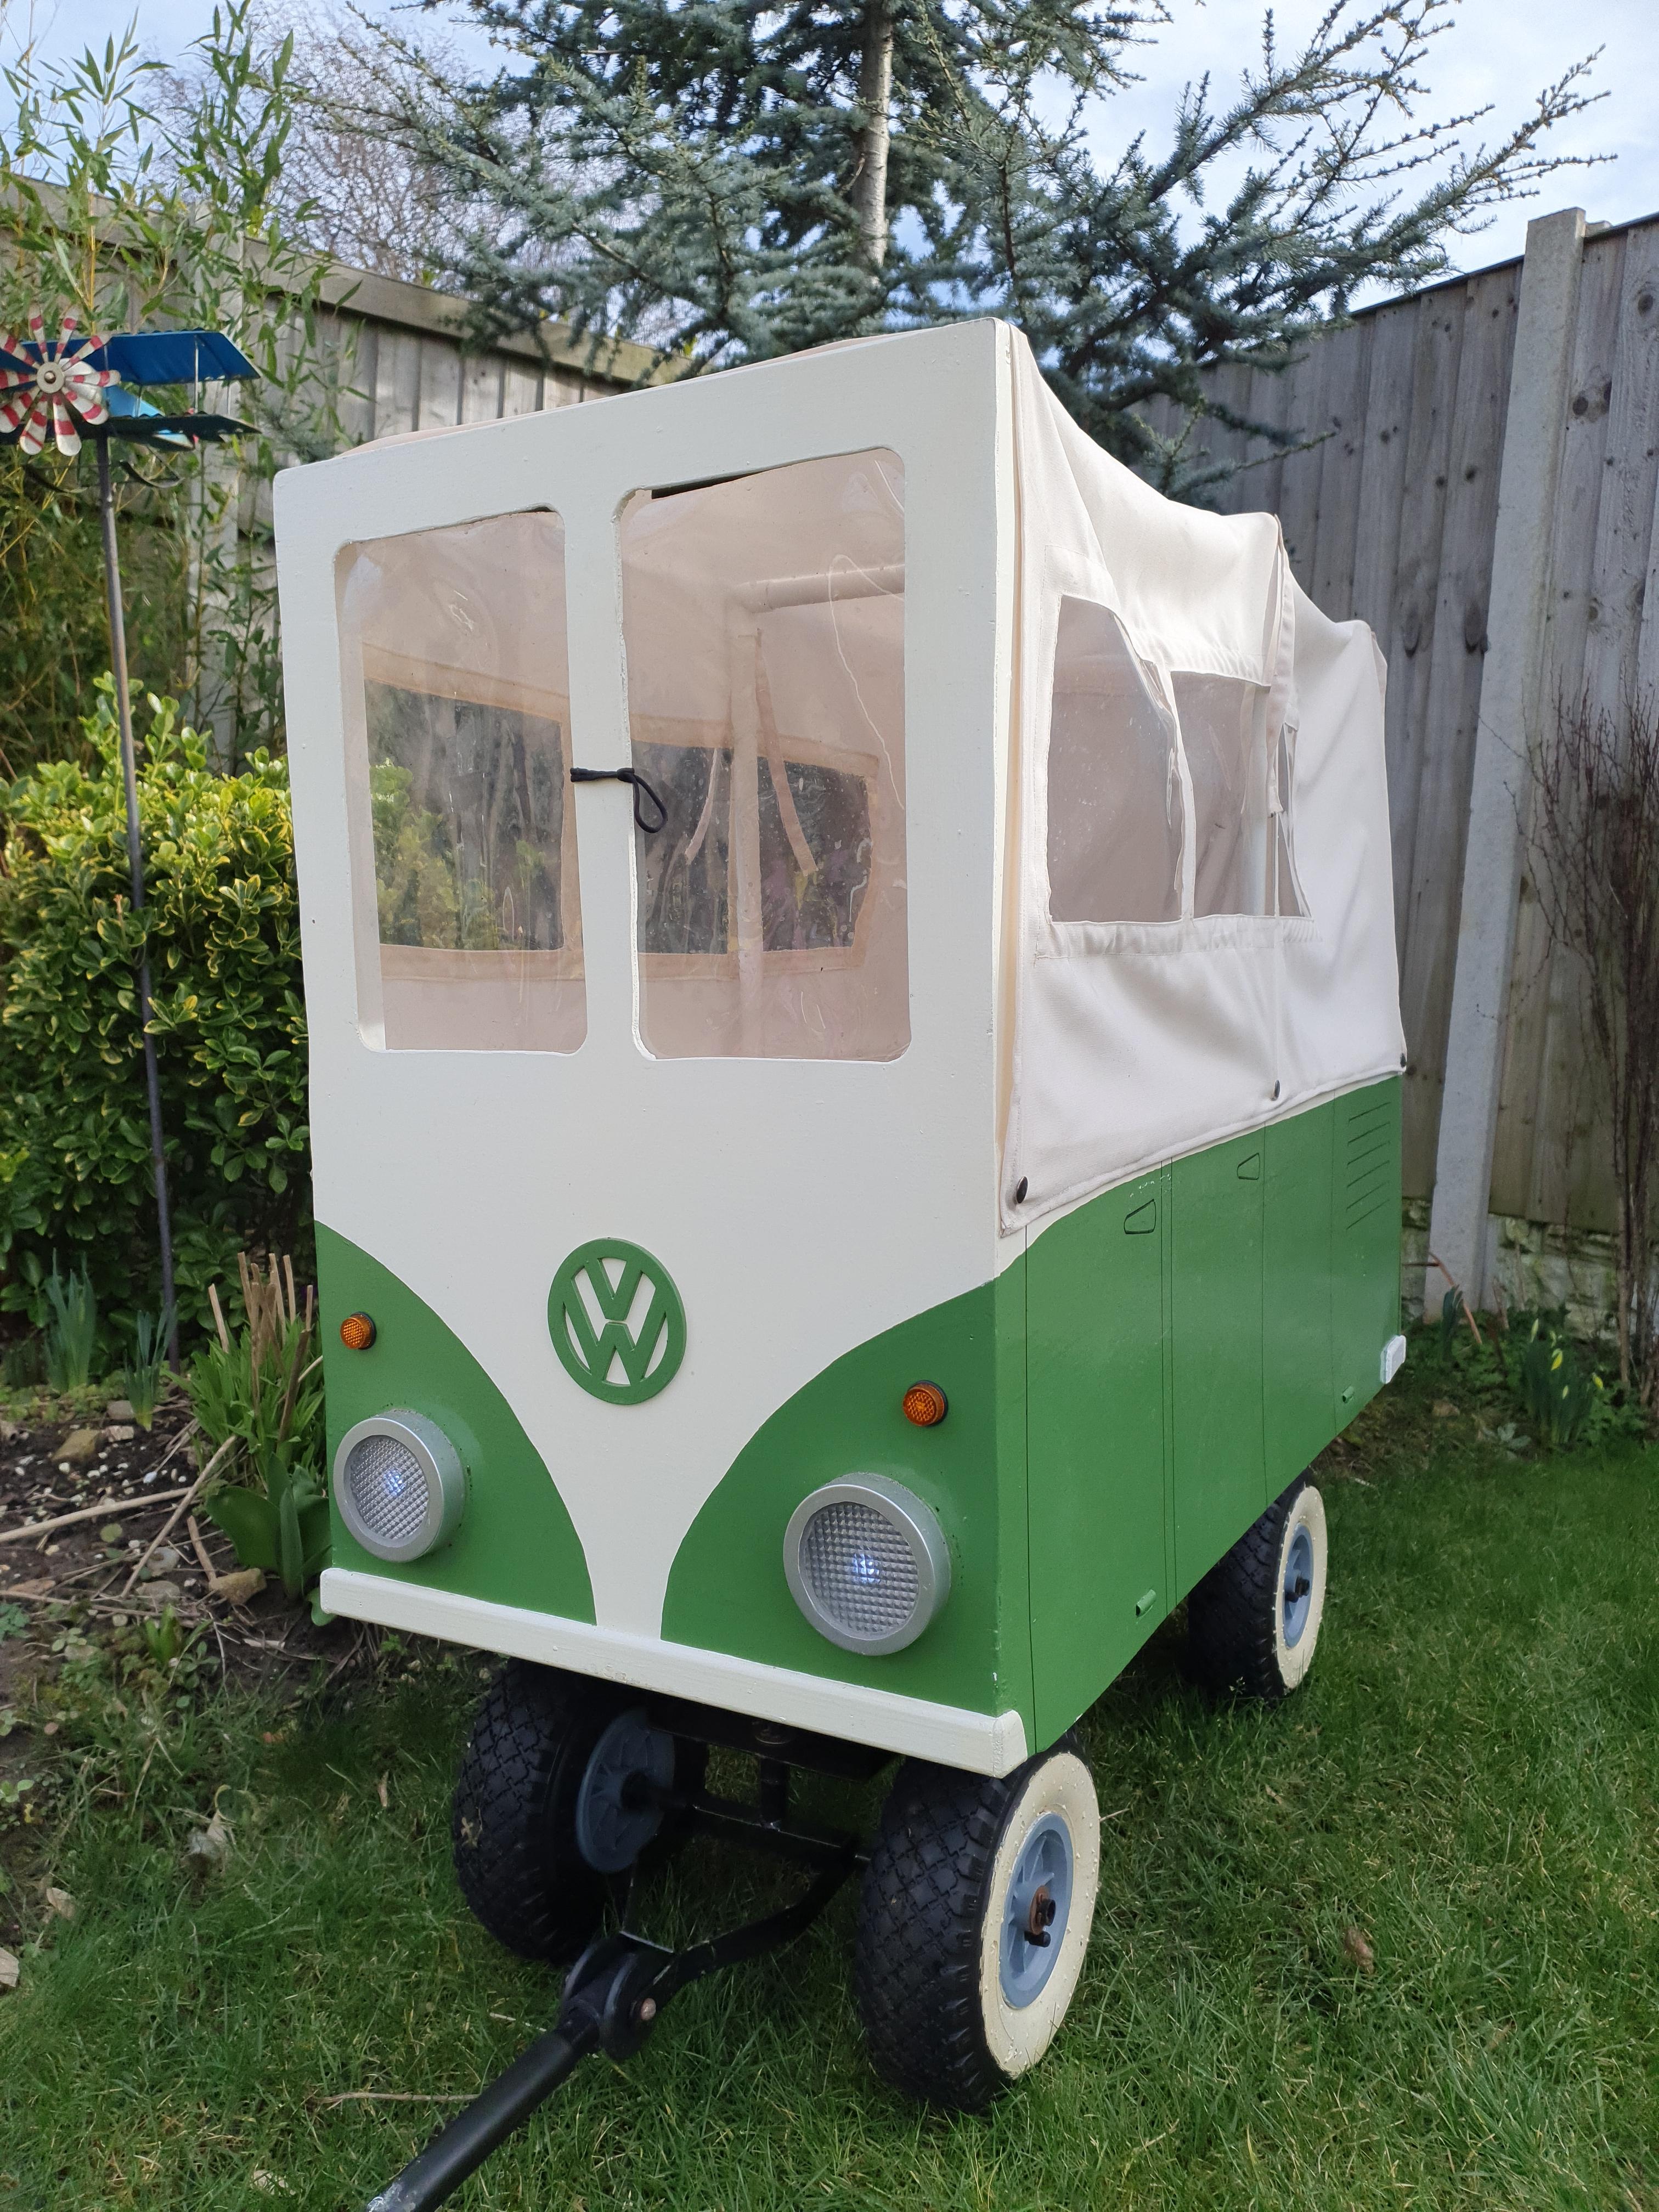 Pimped festival trolley for sale - VW Camper - Chat - Festival Forums